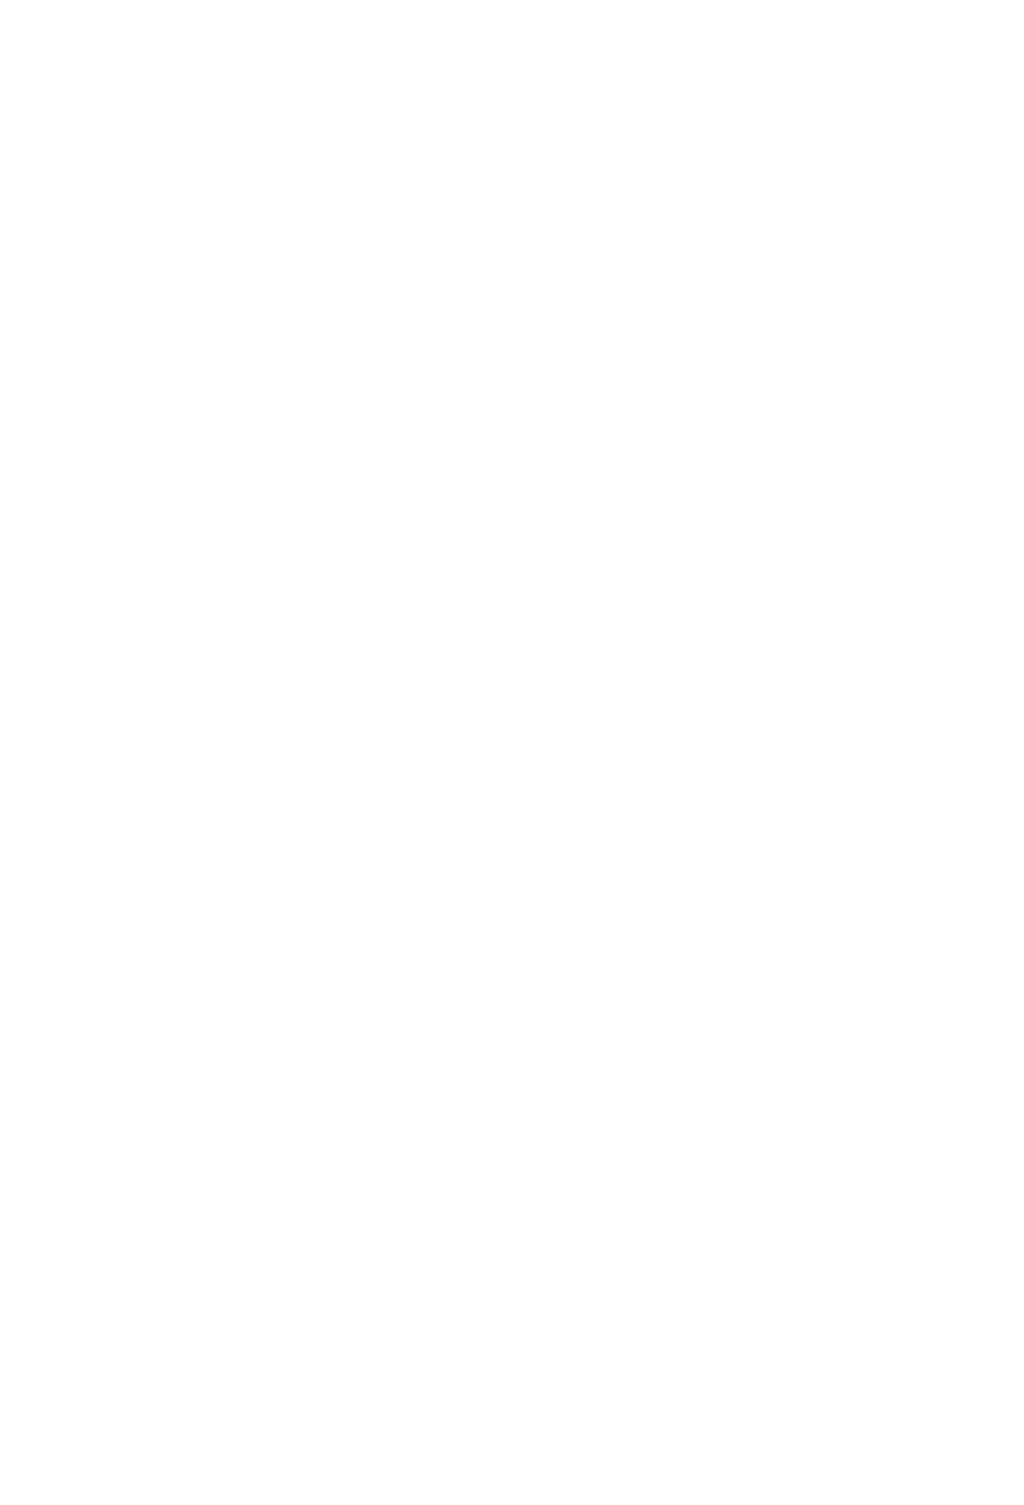 Heaven for climate, Hell for society